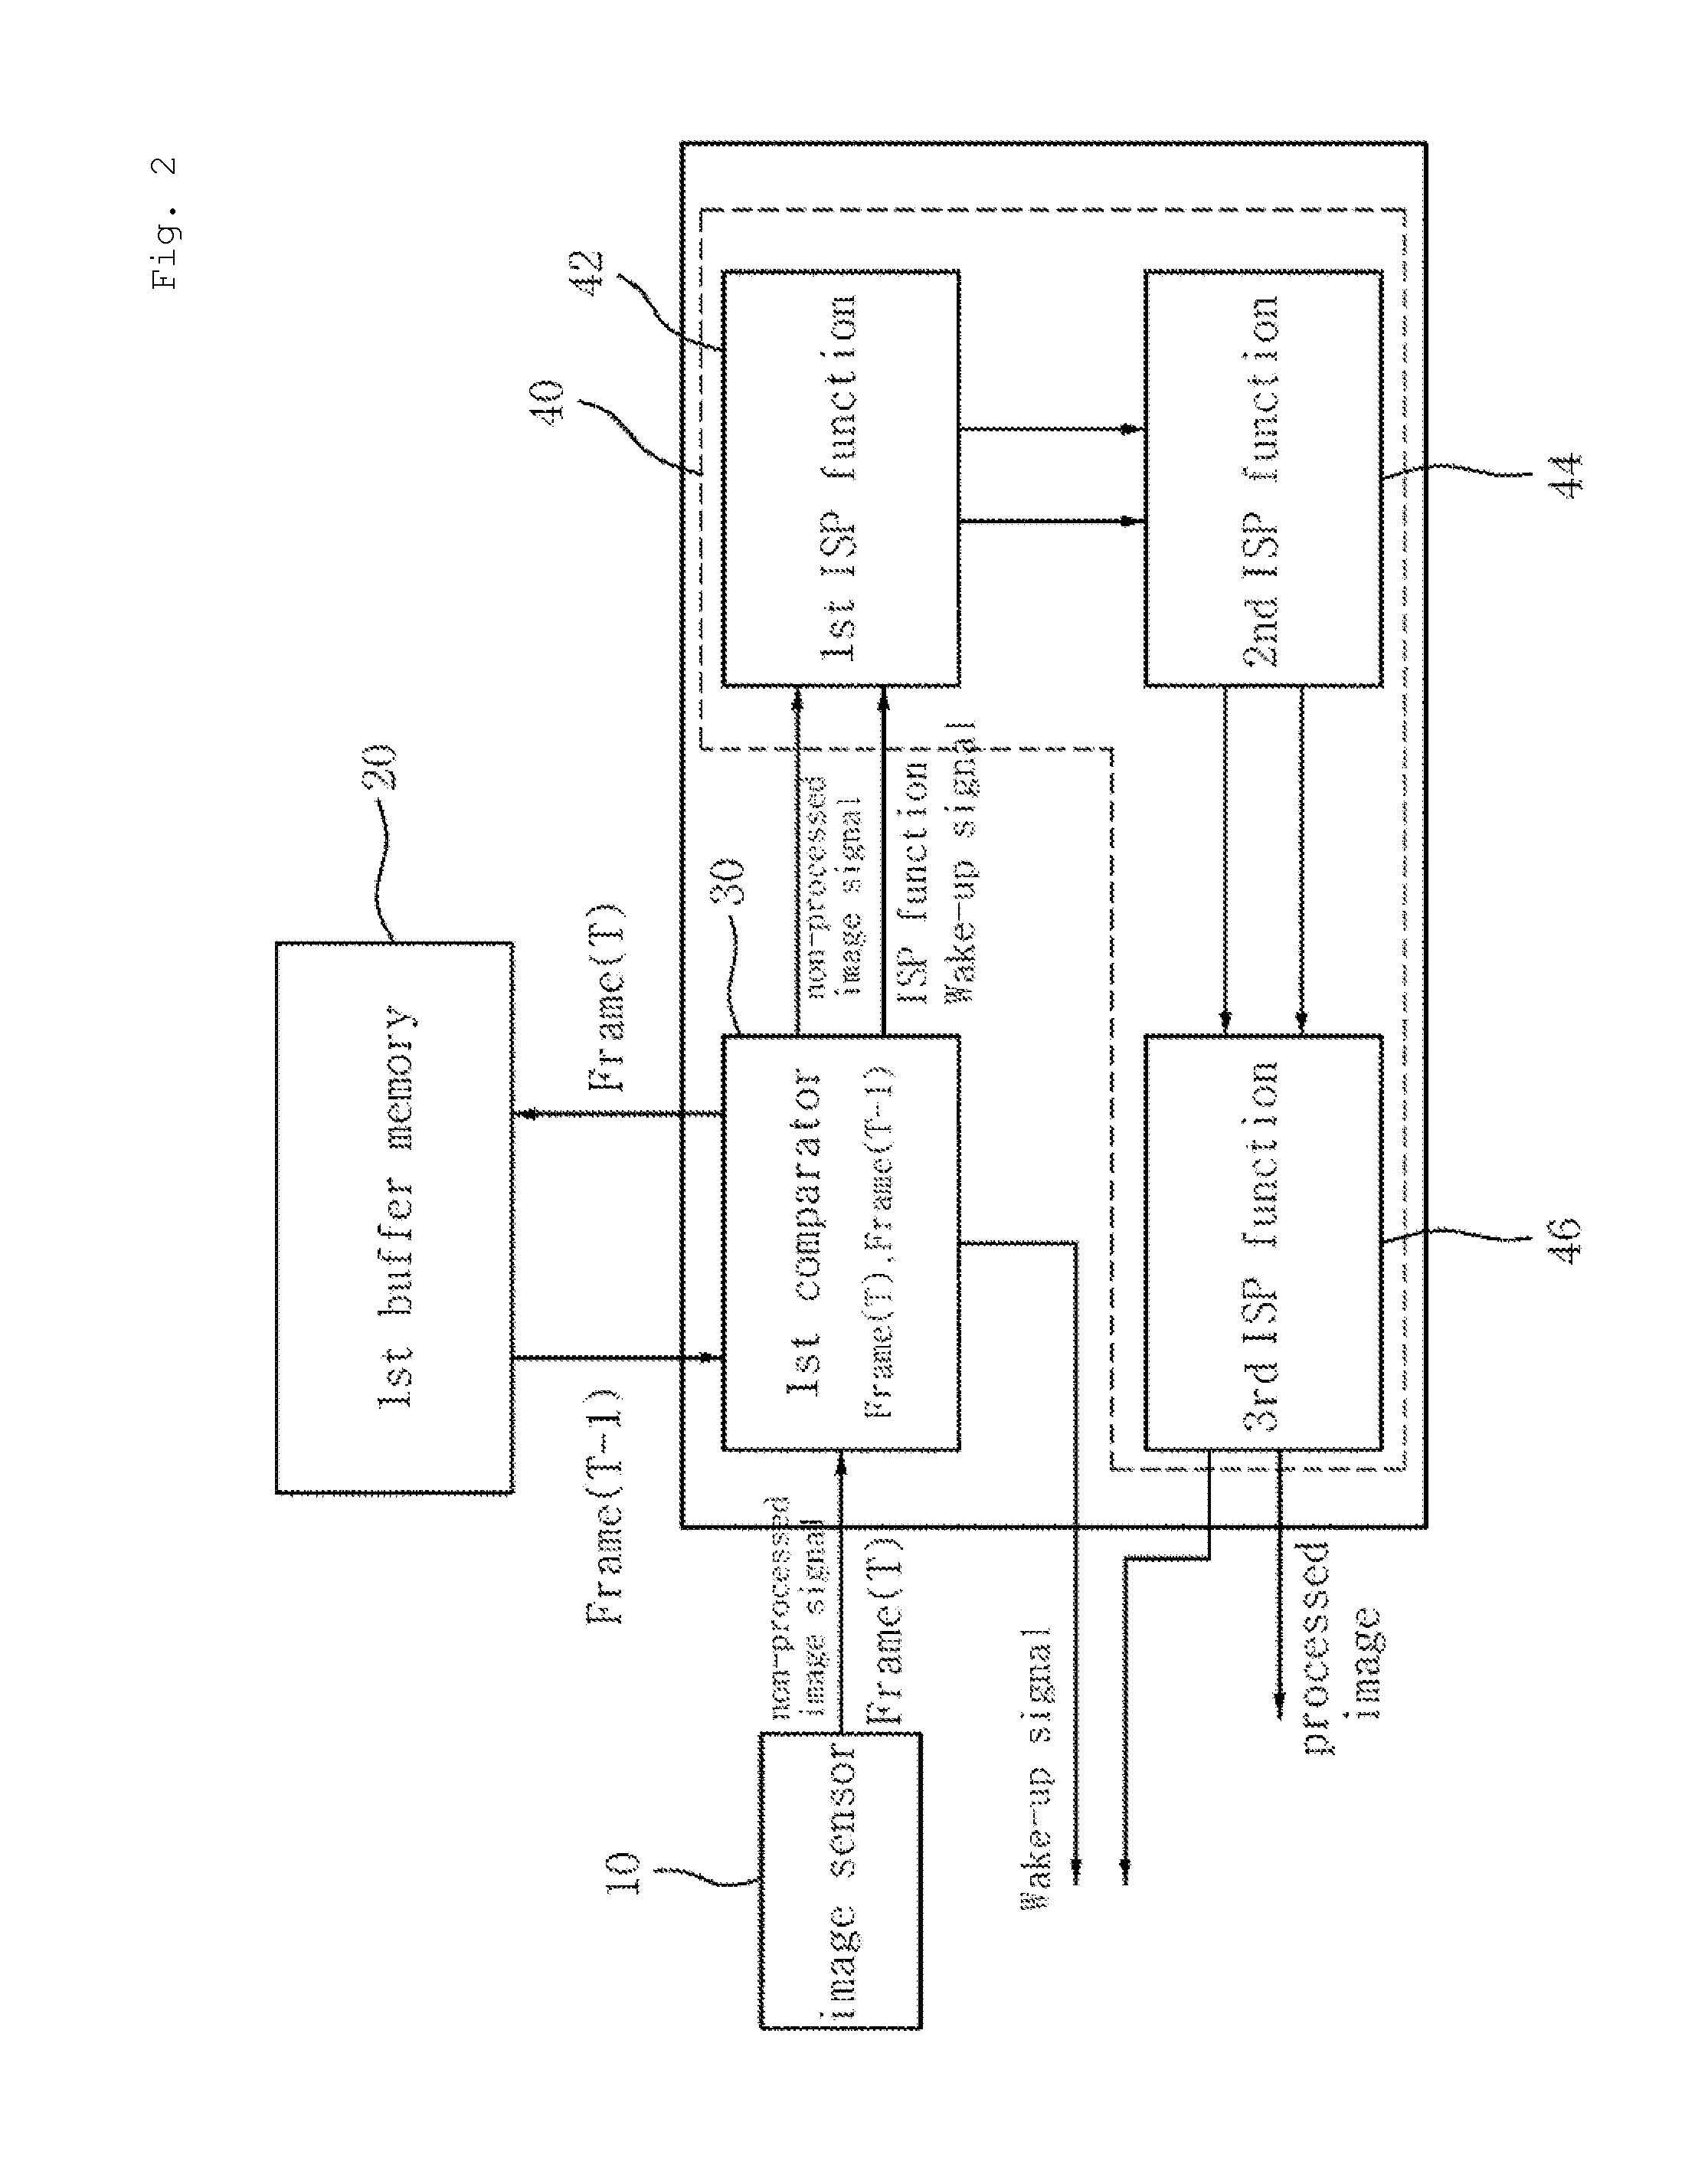 Front-end event detector and low-power camera system using thereof